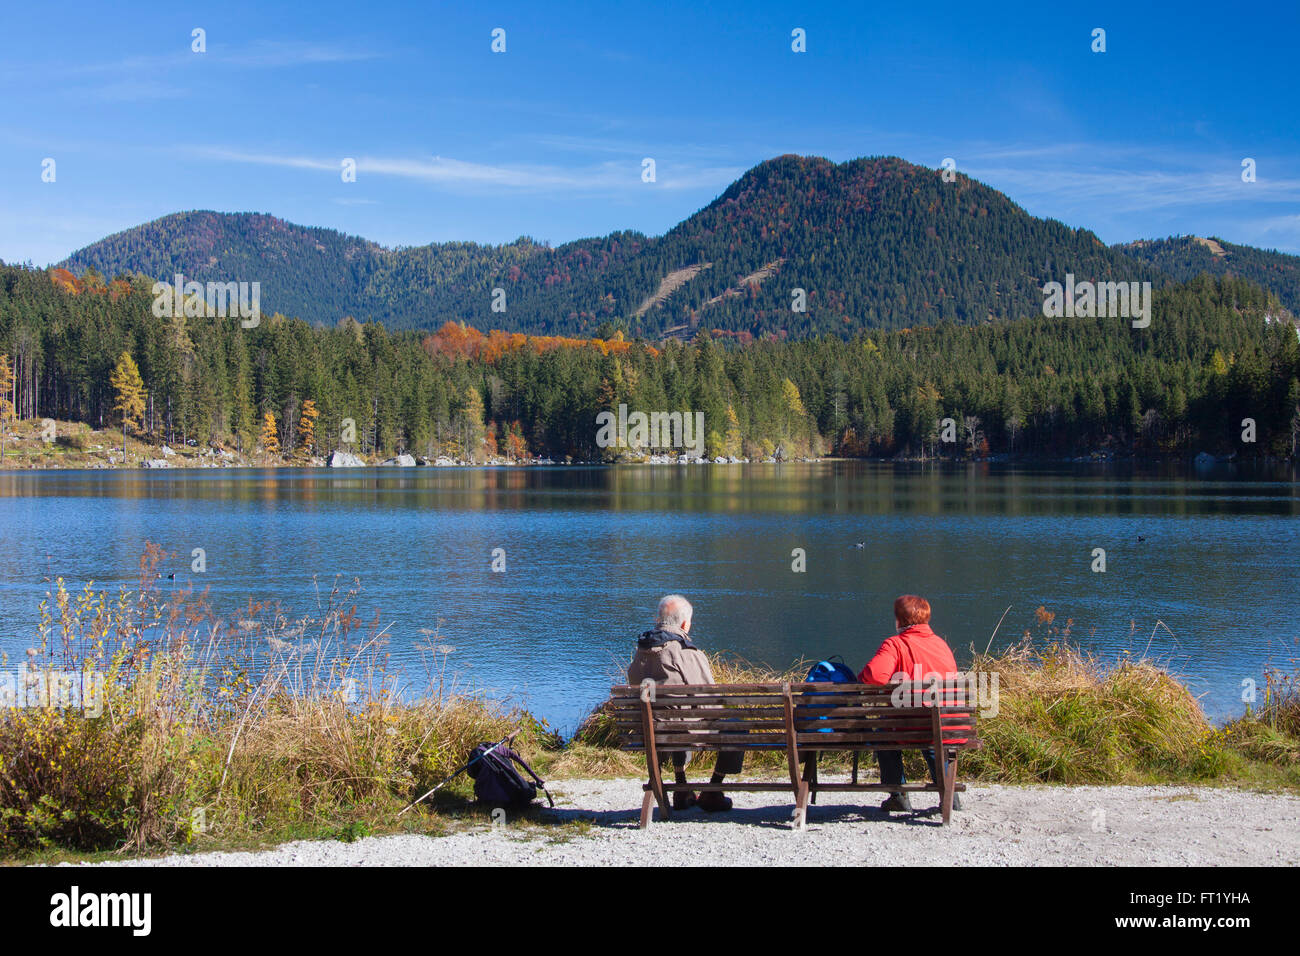 Elderly tourists on bench looking at Lake Hintersee in the Bavarian Alps, Berchtesgadener Land, Upper Bavaria, Germany Stock Photo